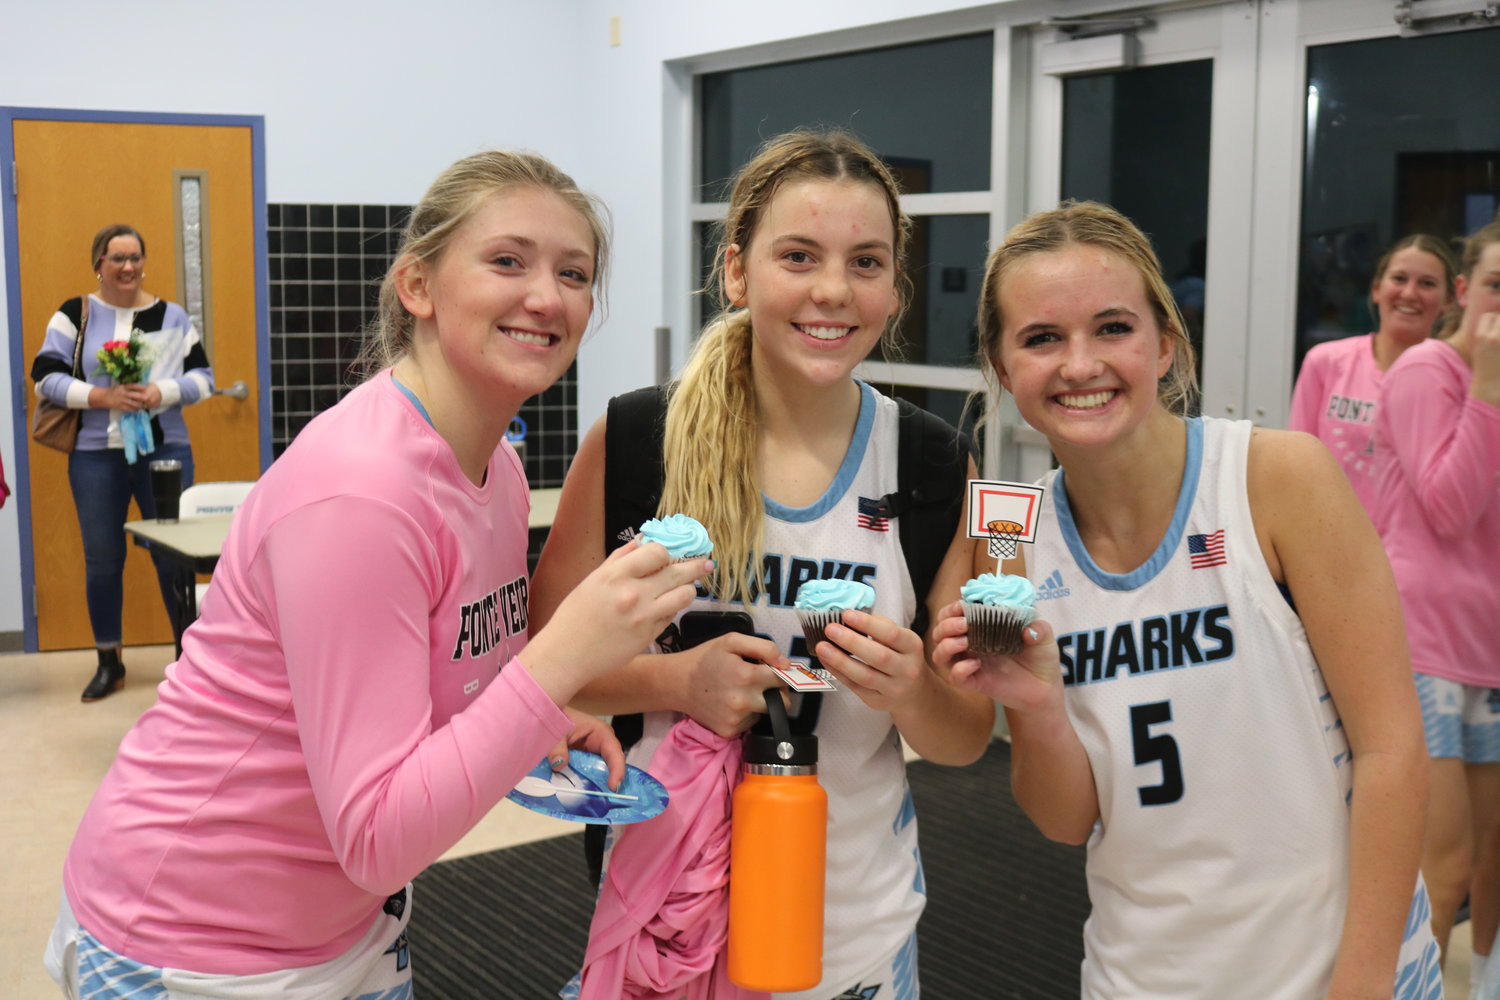 Ponte Vedra seniors Parker Peverley, Paige Hulihan and Reeghan Mayer enjoy some cupcakes following a big victory on senior night.